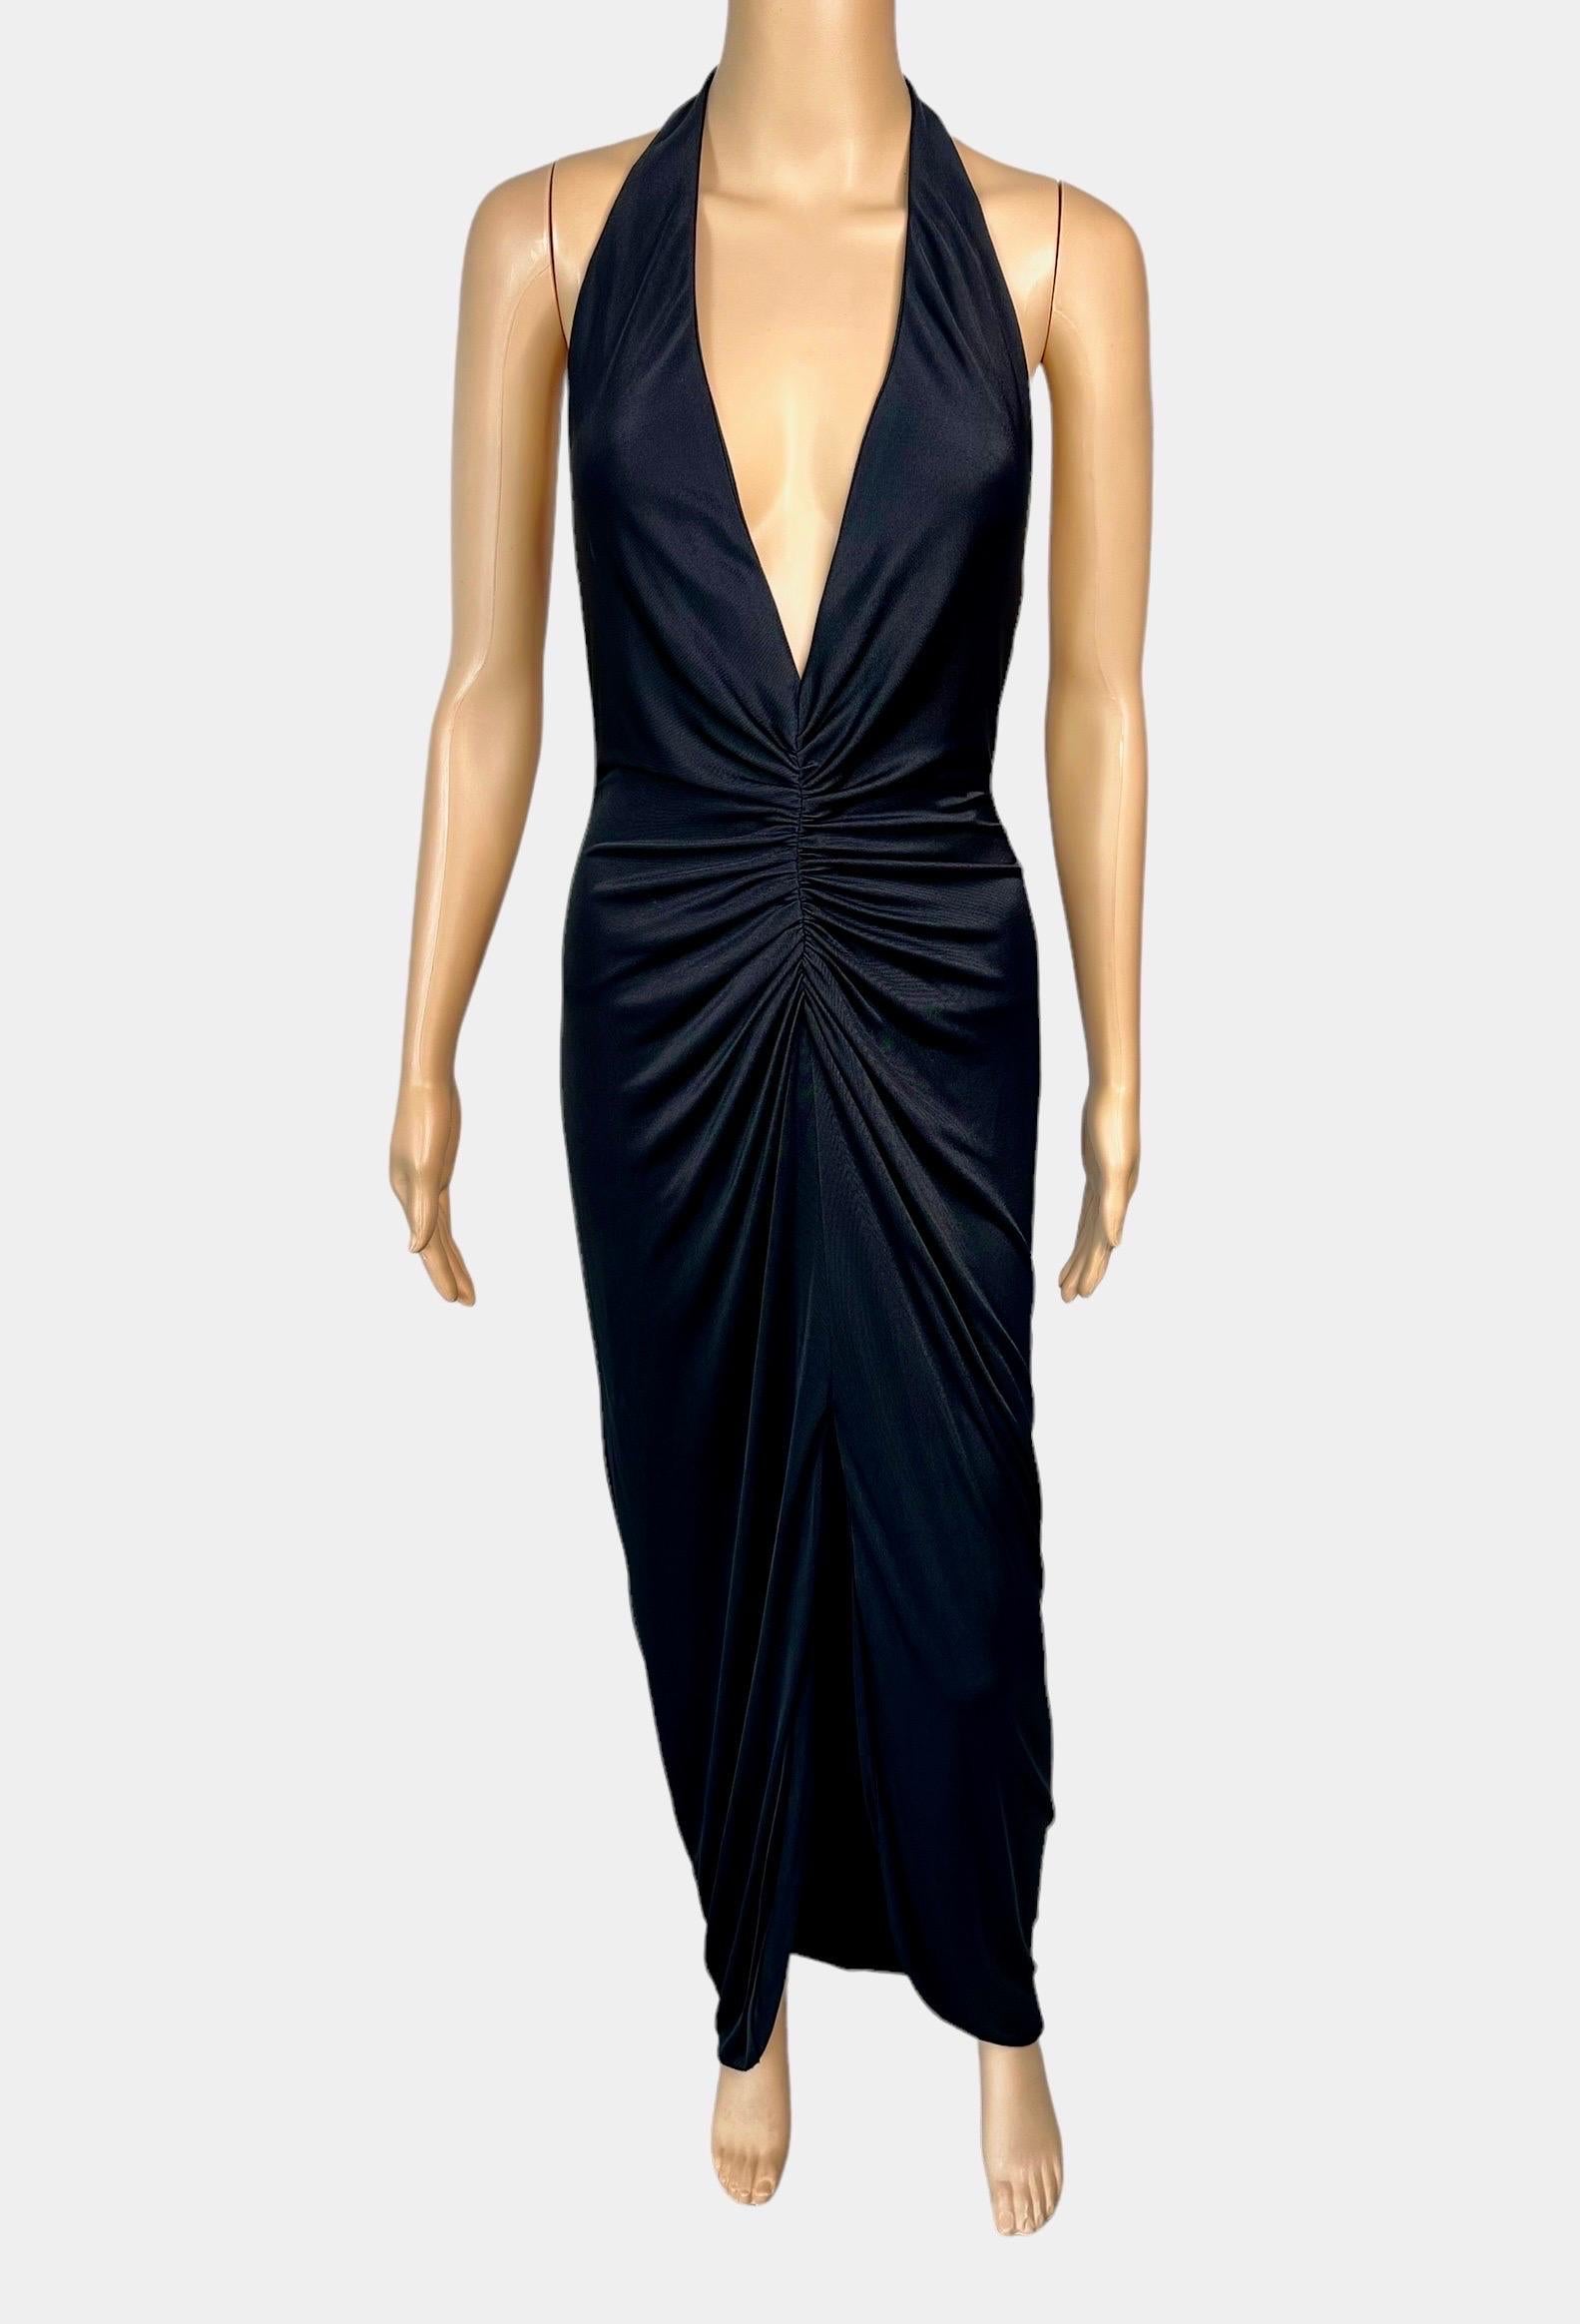 Versace S/S 2005 Runway Plunging Hi-Low Ruched Open Back Evening Dress Gown For Sale 5